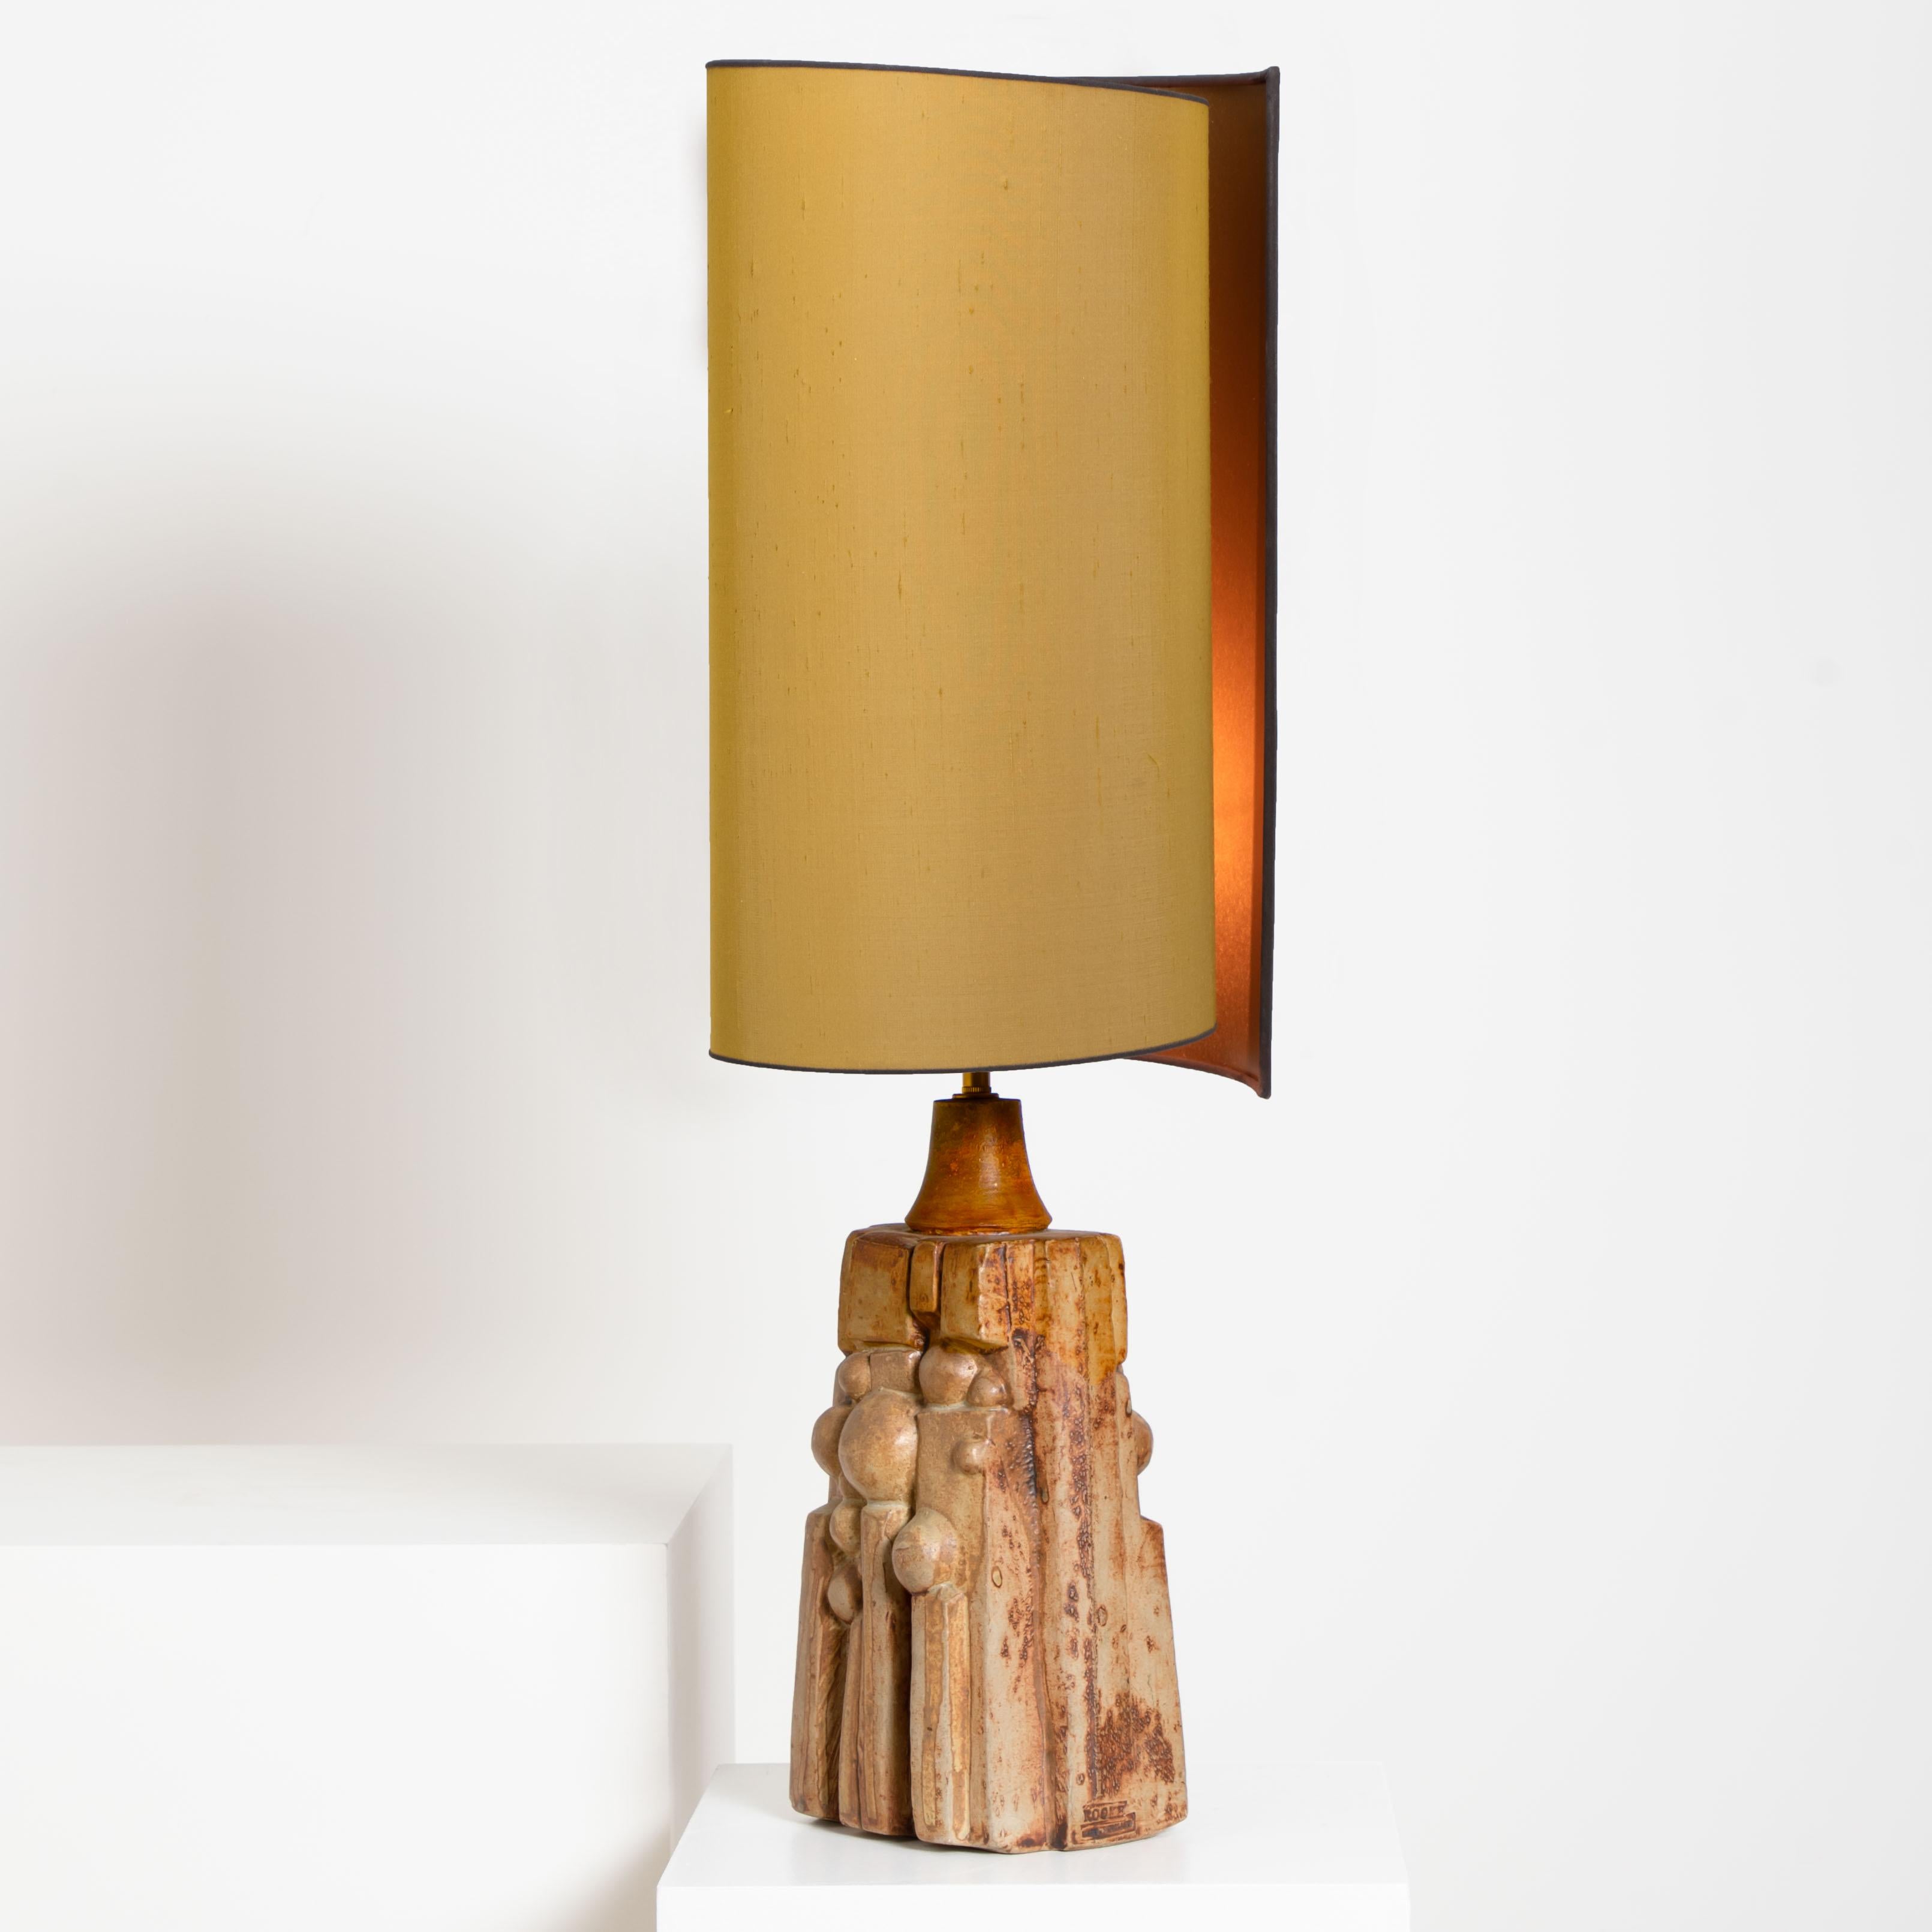 20th Century B. Rooke Ceramic Lamp with New Custom Made Silk Lampshade by René Houben, 1960s